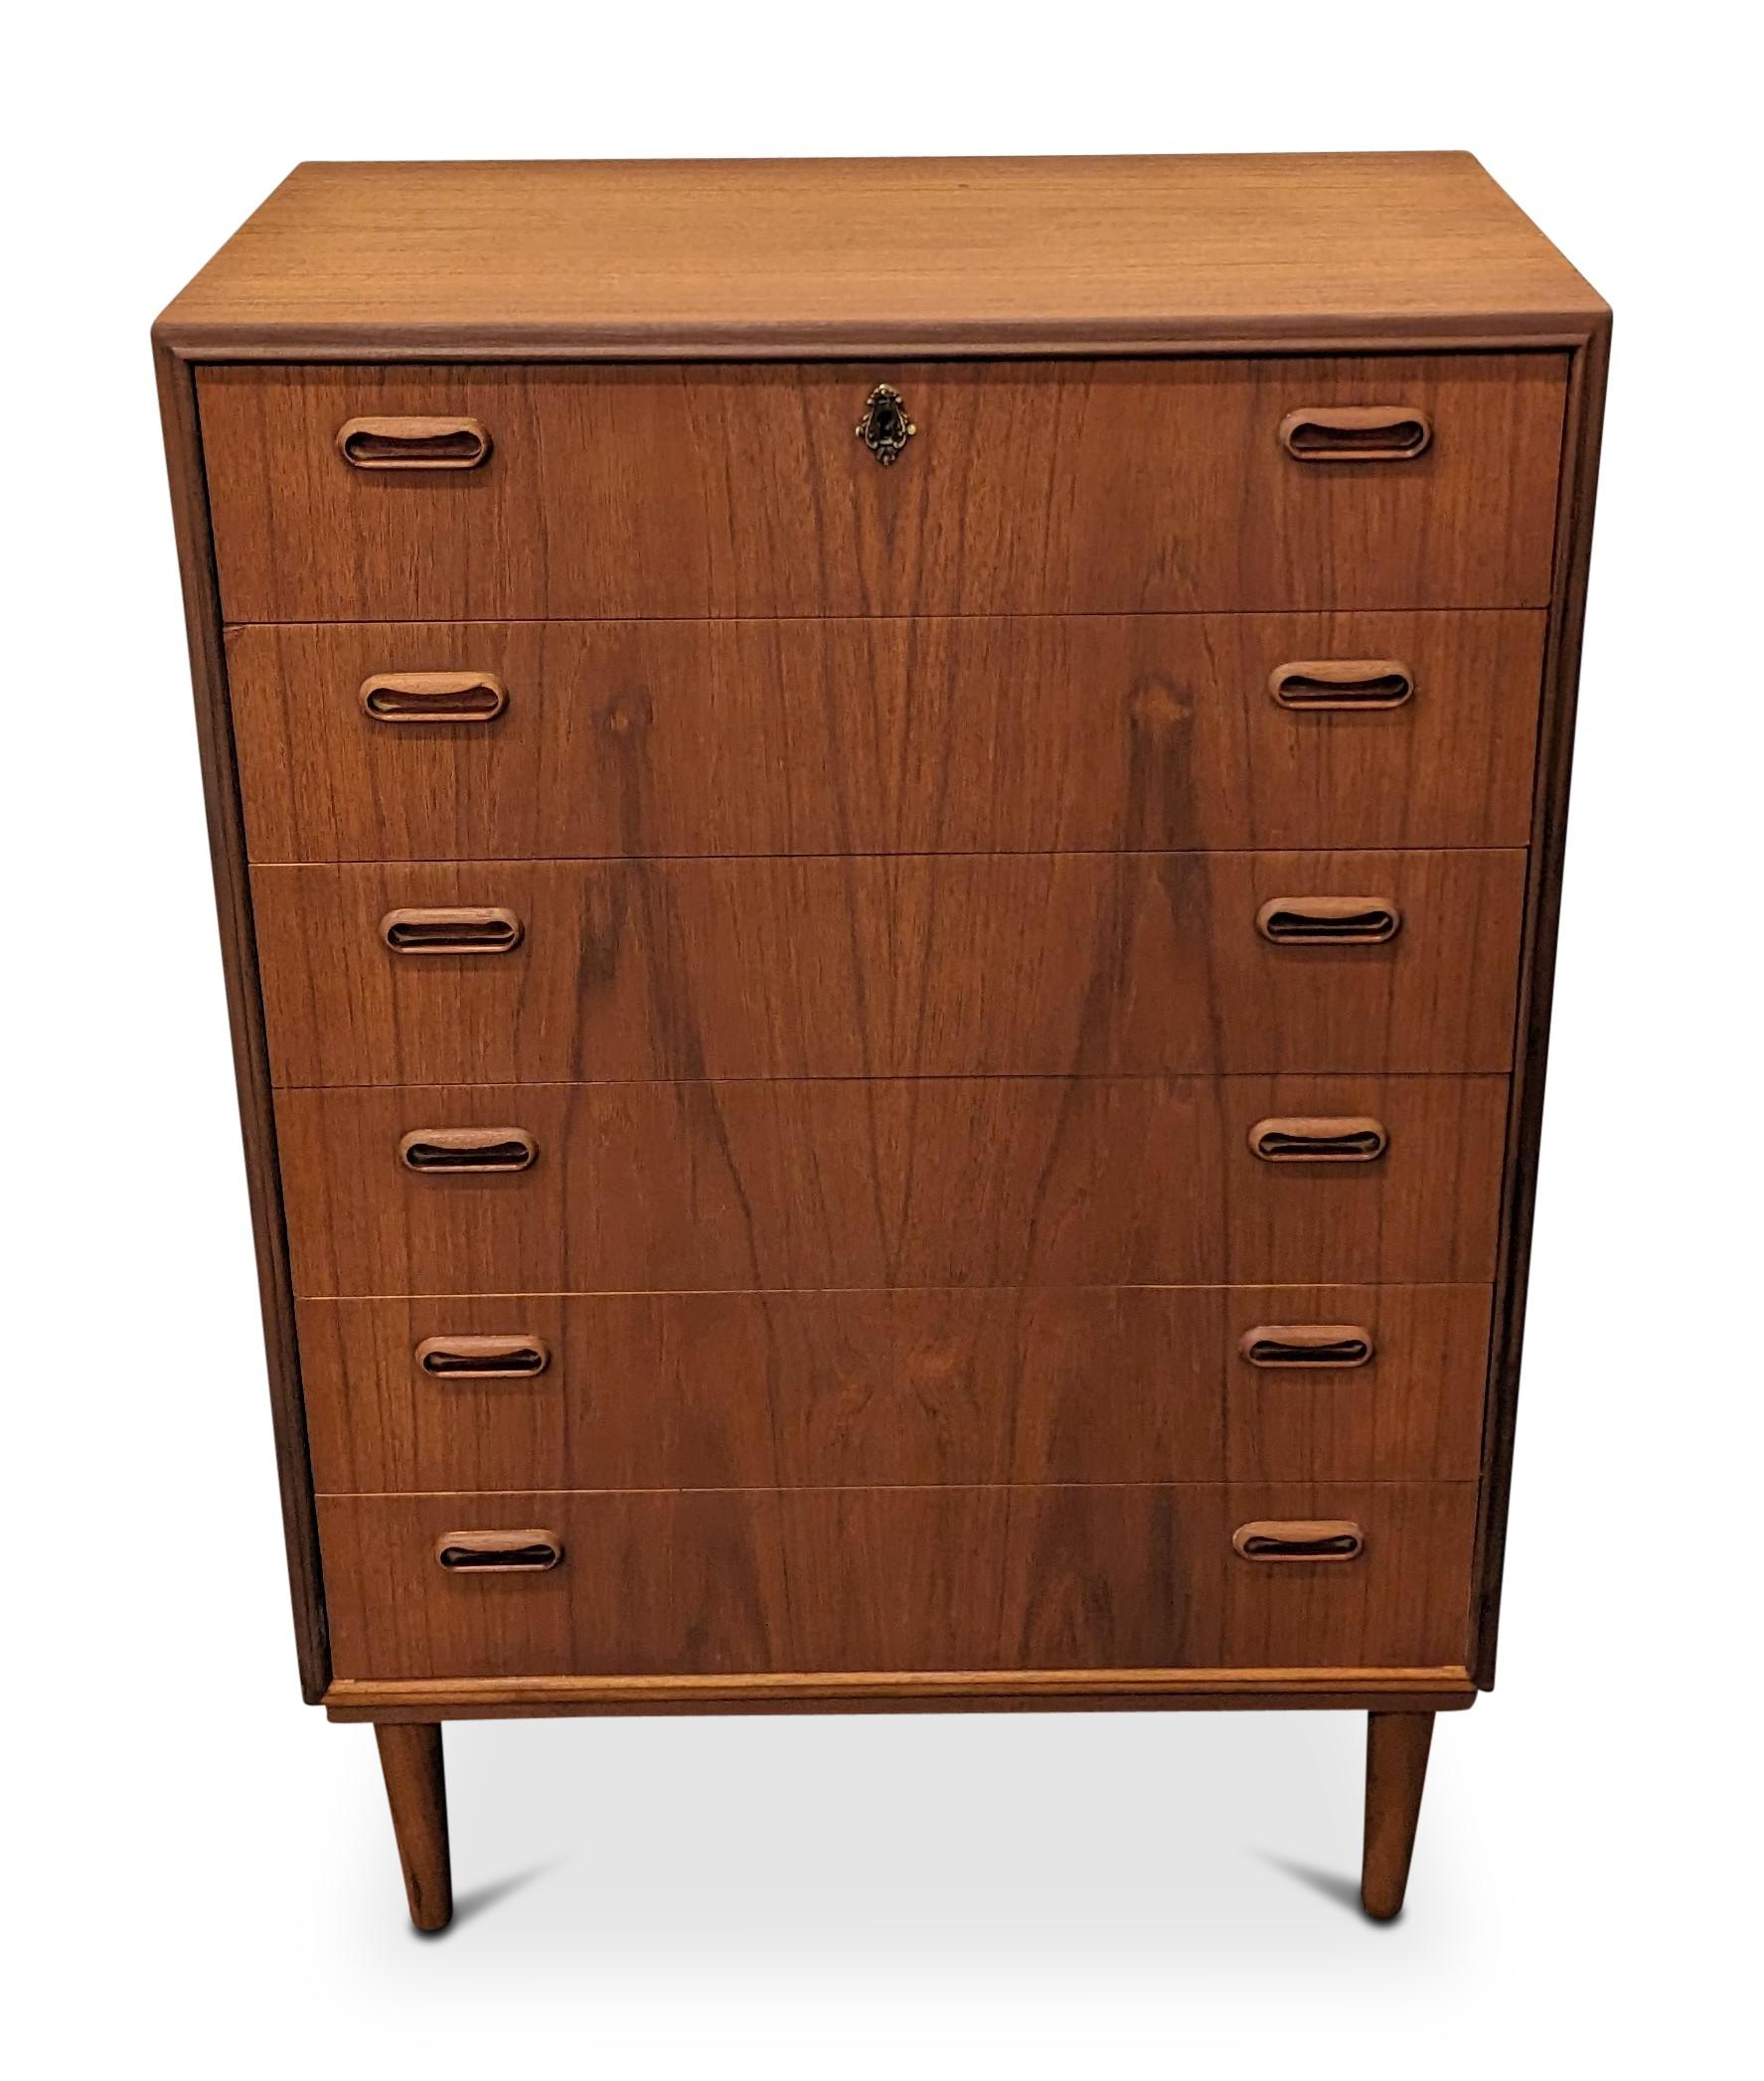 Vintage Danish Mid century Teak Dresser - 122373 In Good Condition For Sale In Brooklyn, NY